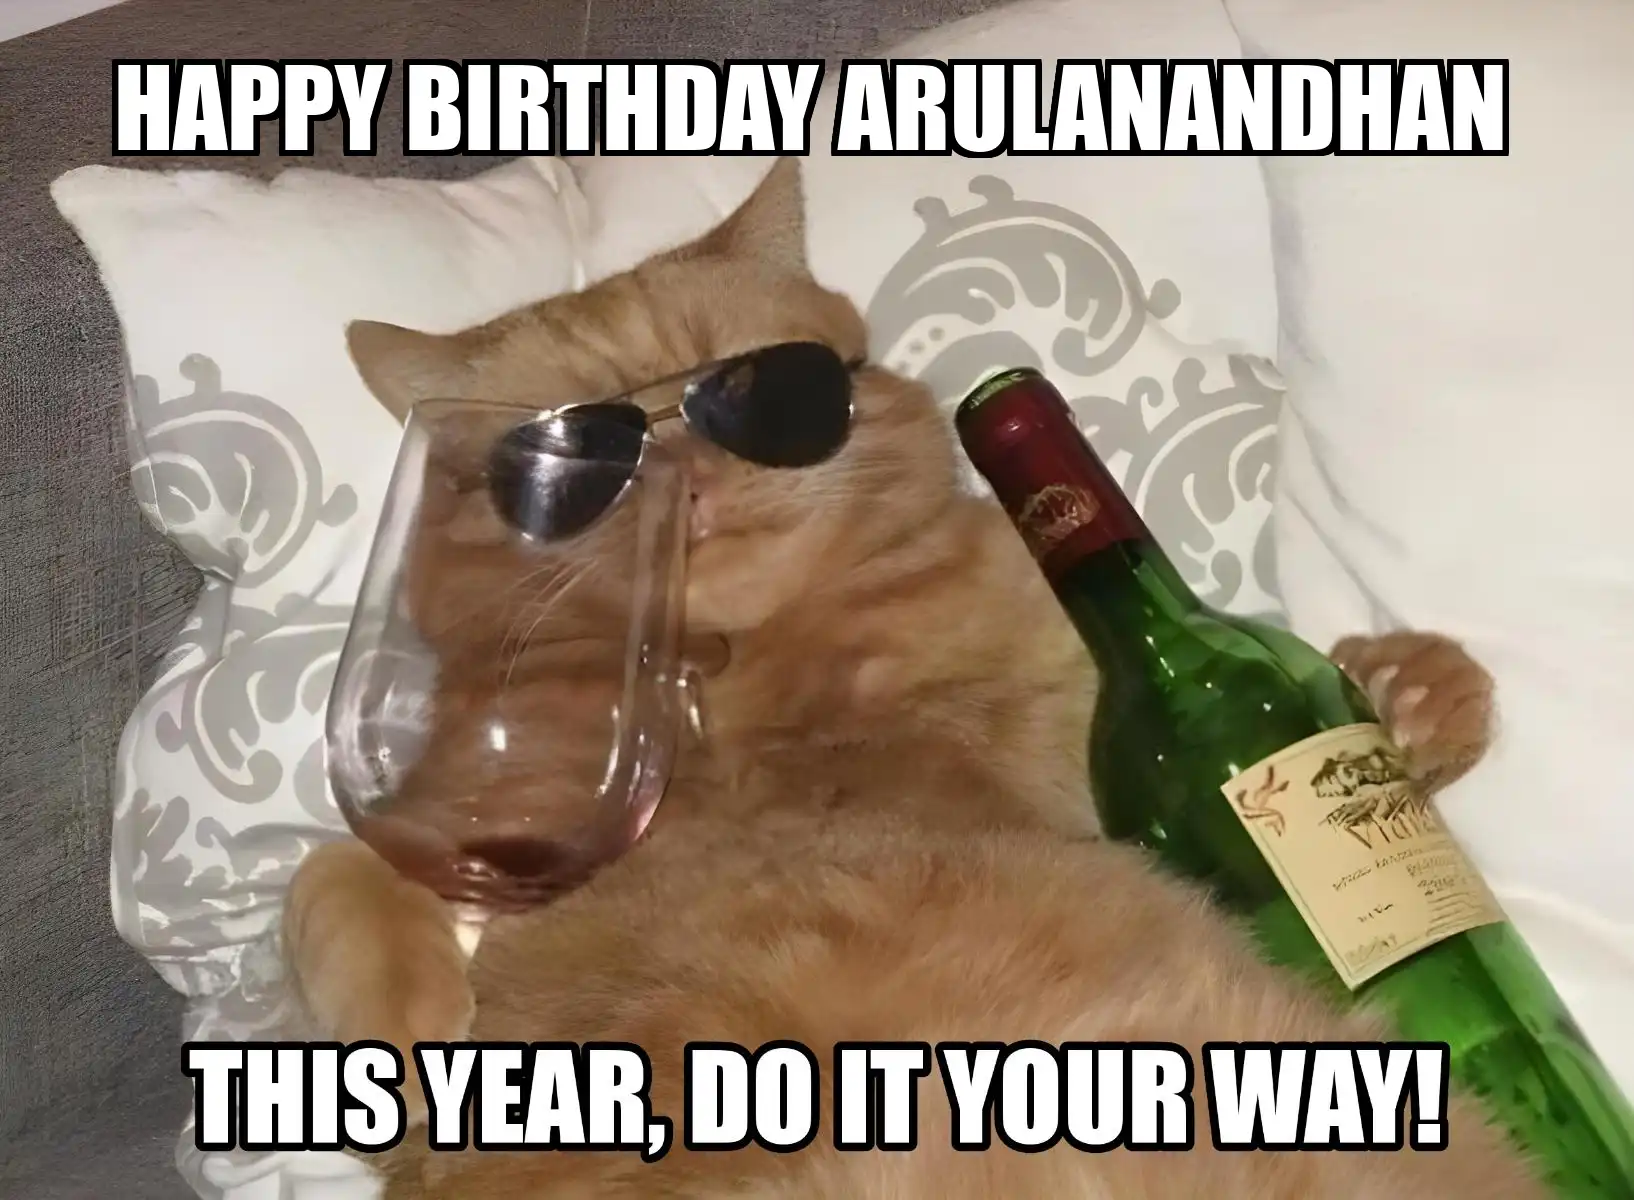 Happy Birthday Arulanandhan This Year Do It Your Way Meme